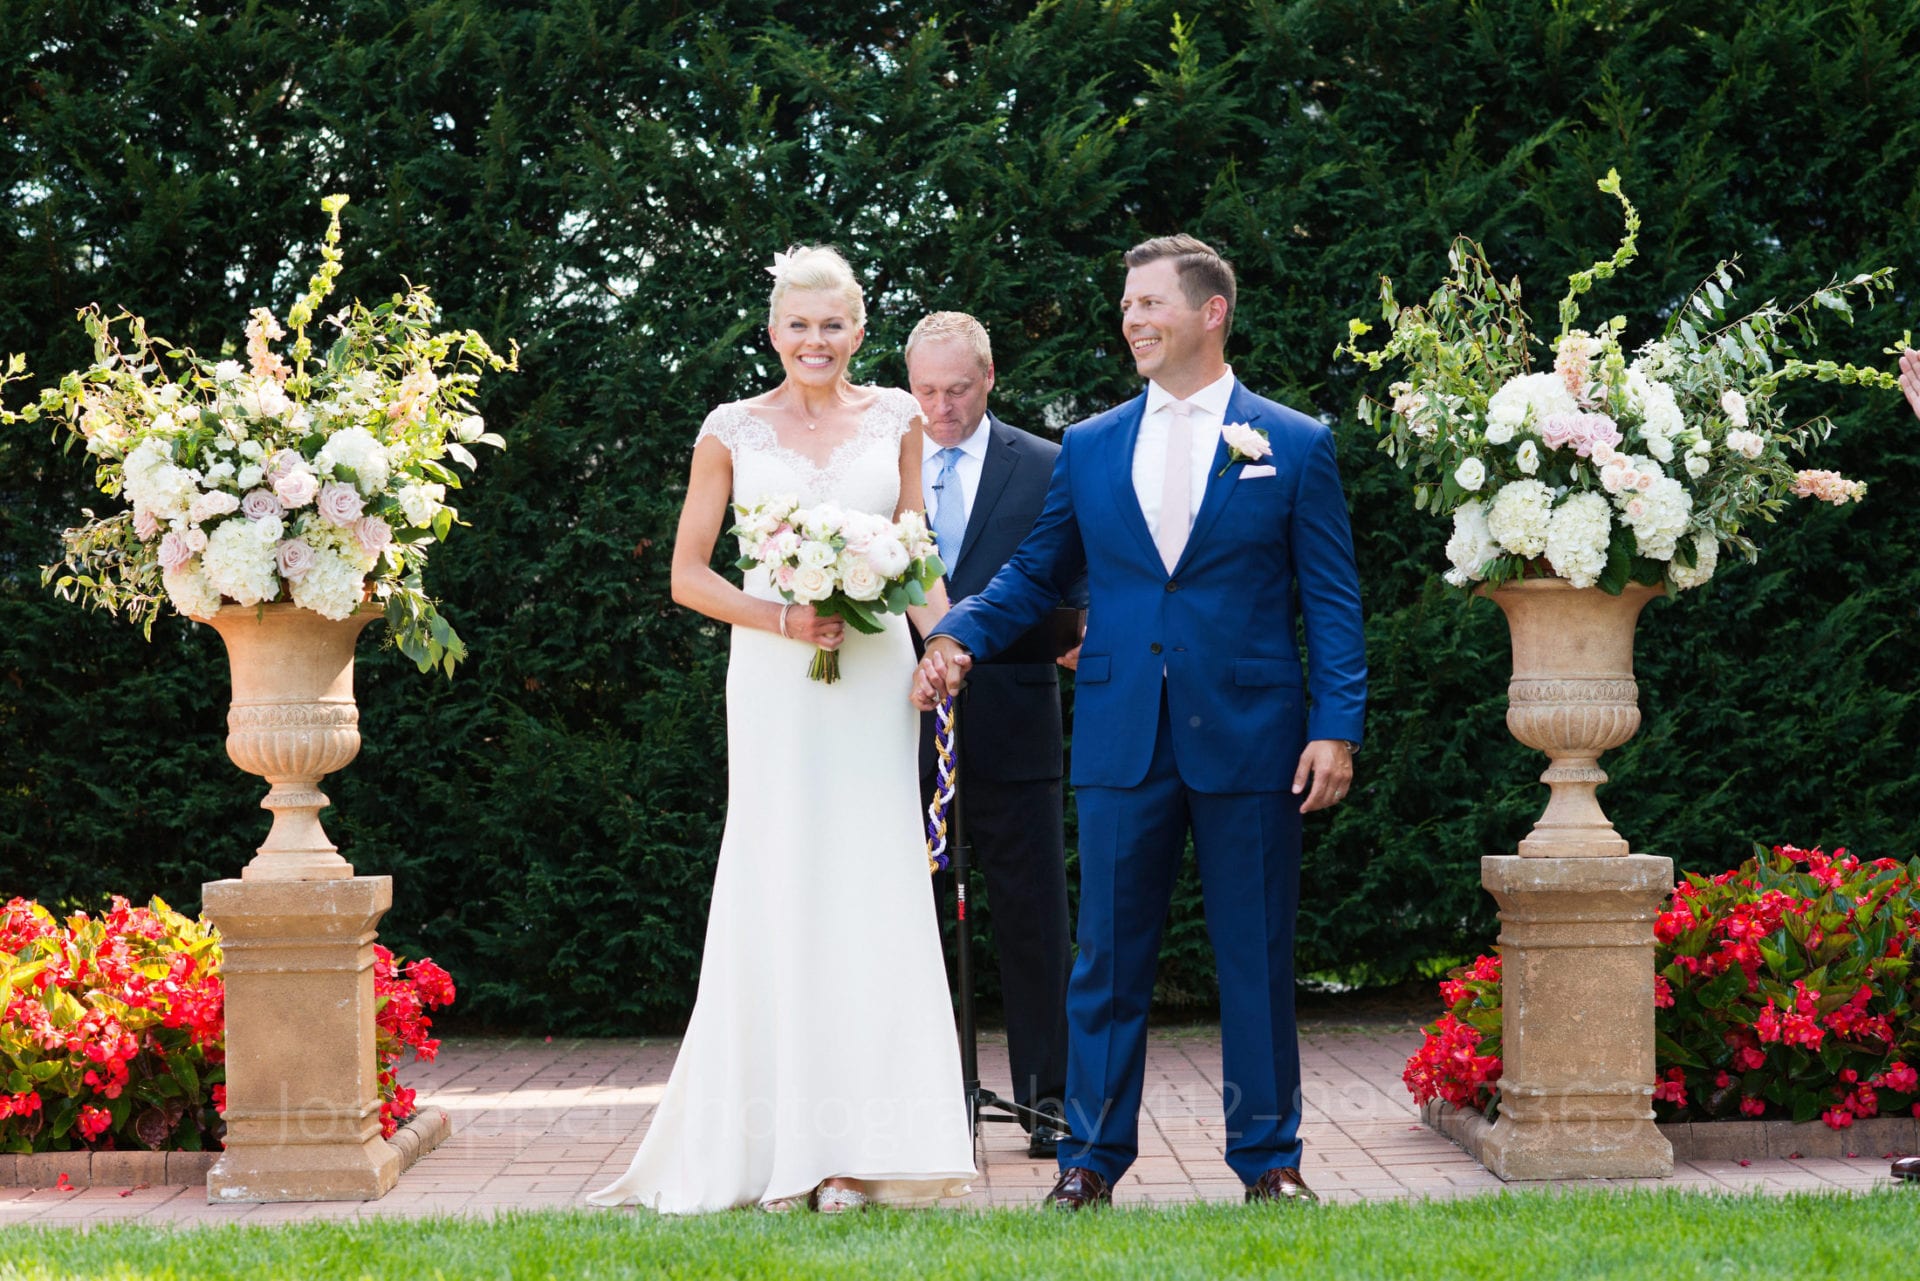 A bride holding a bouquet of roses has a big smile on her face as she and her groom (who looks over at her) are presented to their guests as man and wife. There are two urns filled with flowers and vines to either side of them during their Omni Bedford Springs Resort Wedding.